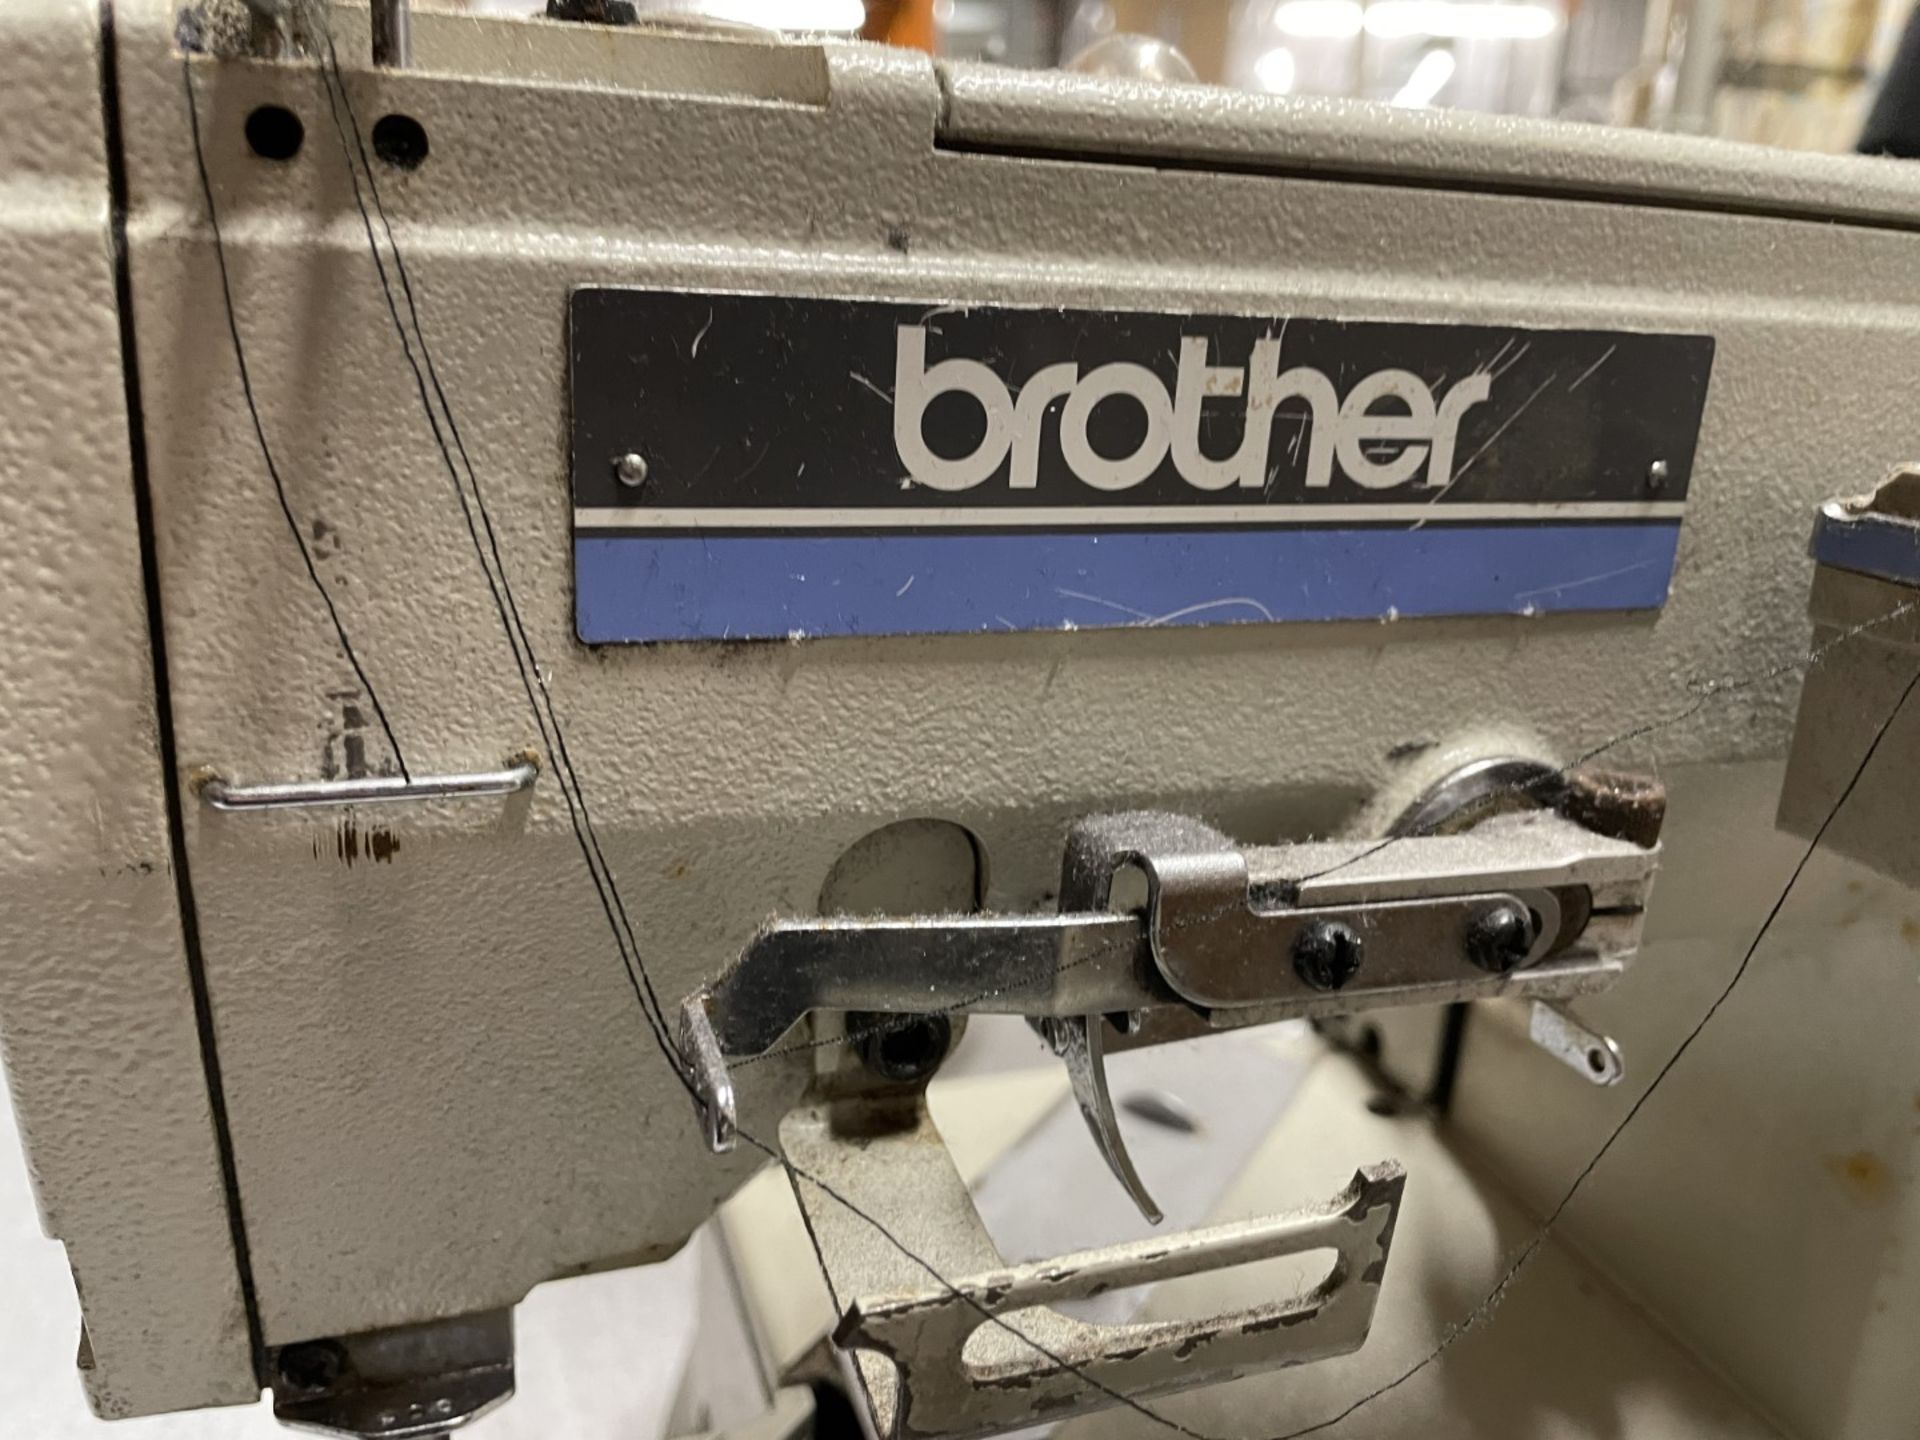 1 x Brother FD3-B257 Cylinder Bed Covering Stitcher and Thread Trimmer Industrial Sewing Machine Wit - Image 11 of 22